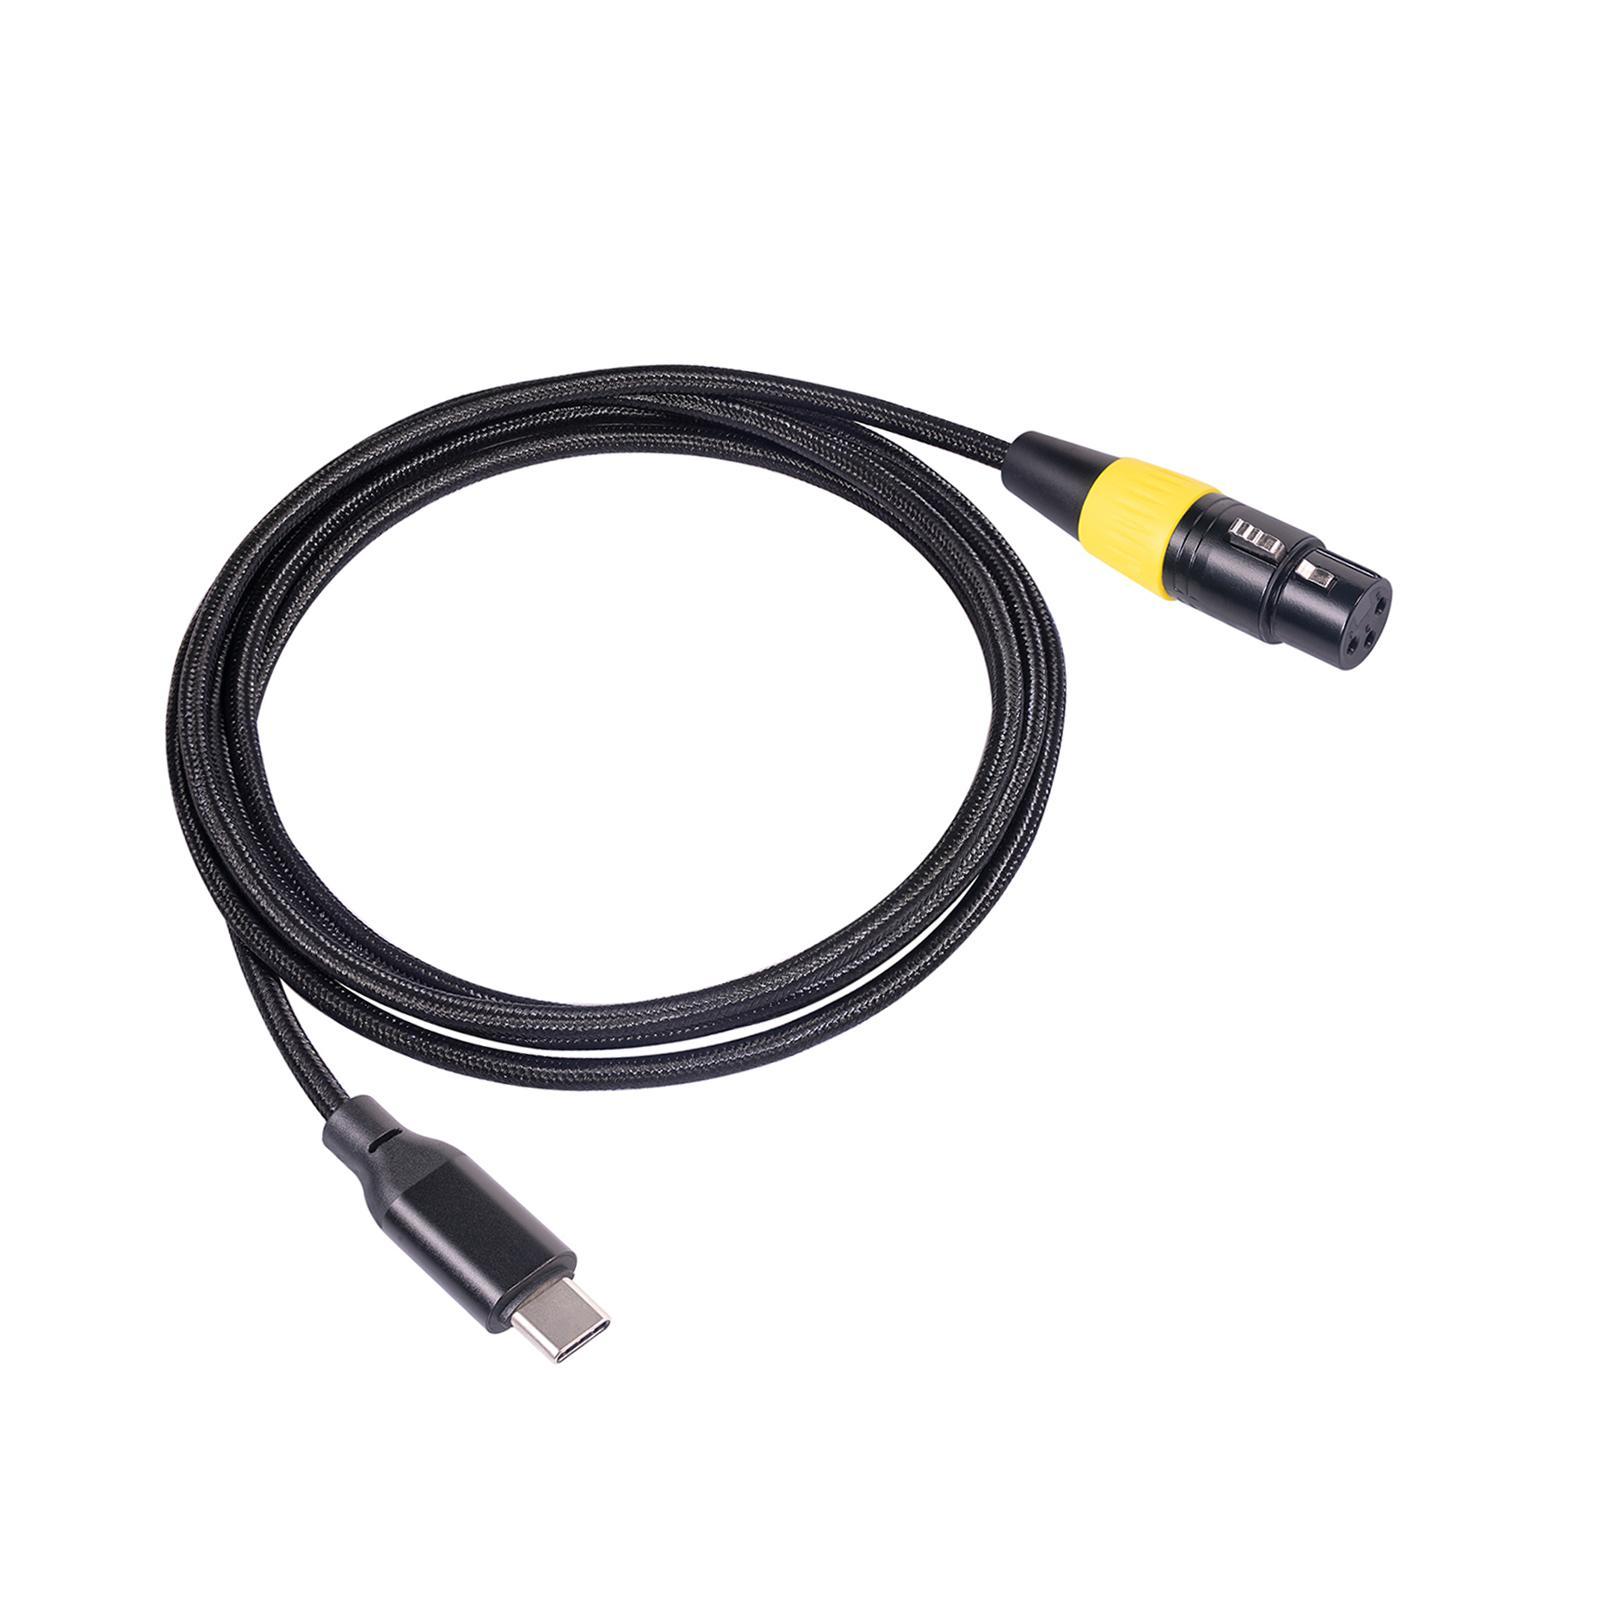 Multifunction XLR Female to USB Microphone Cable Audio Cable Male to Female for Studio